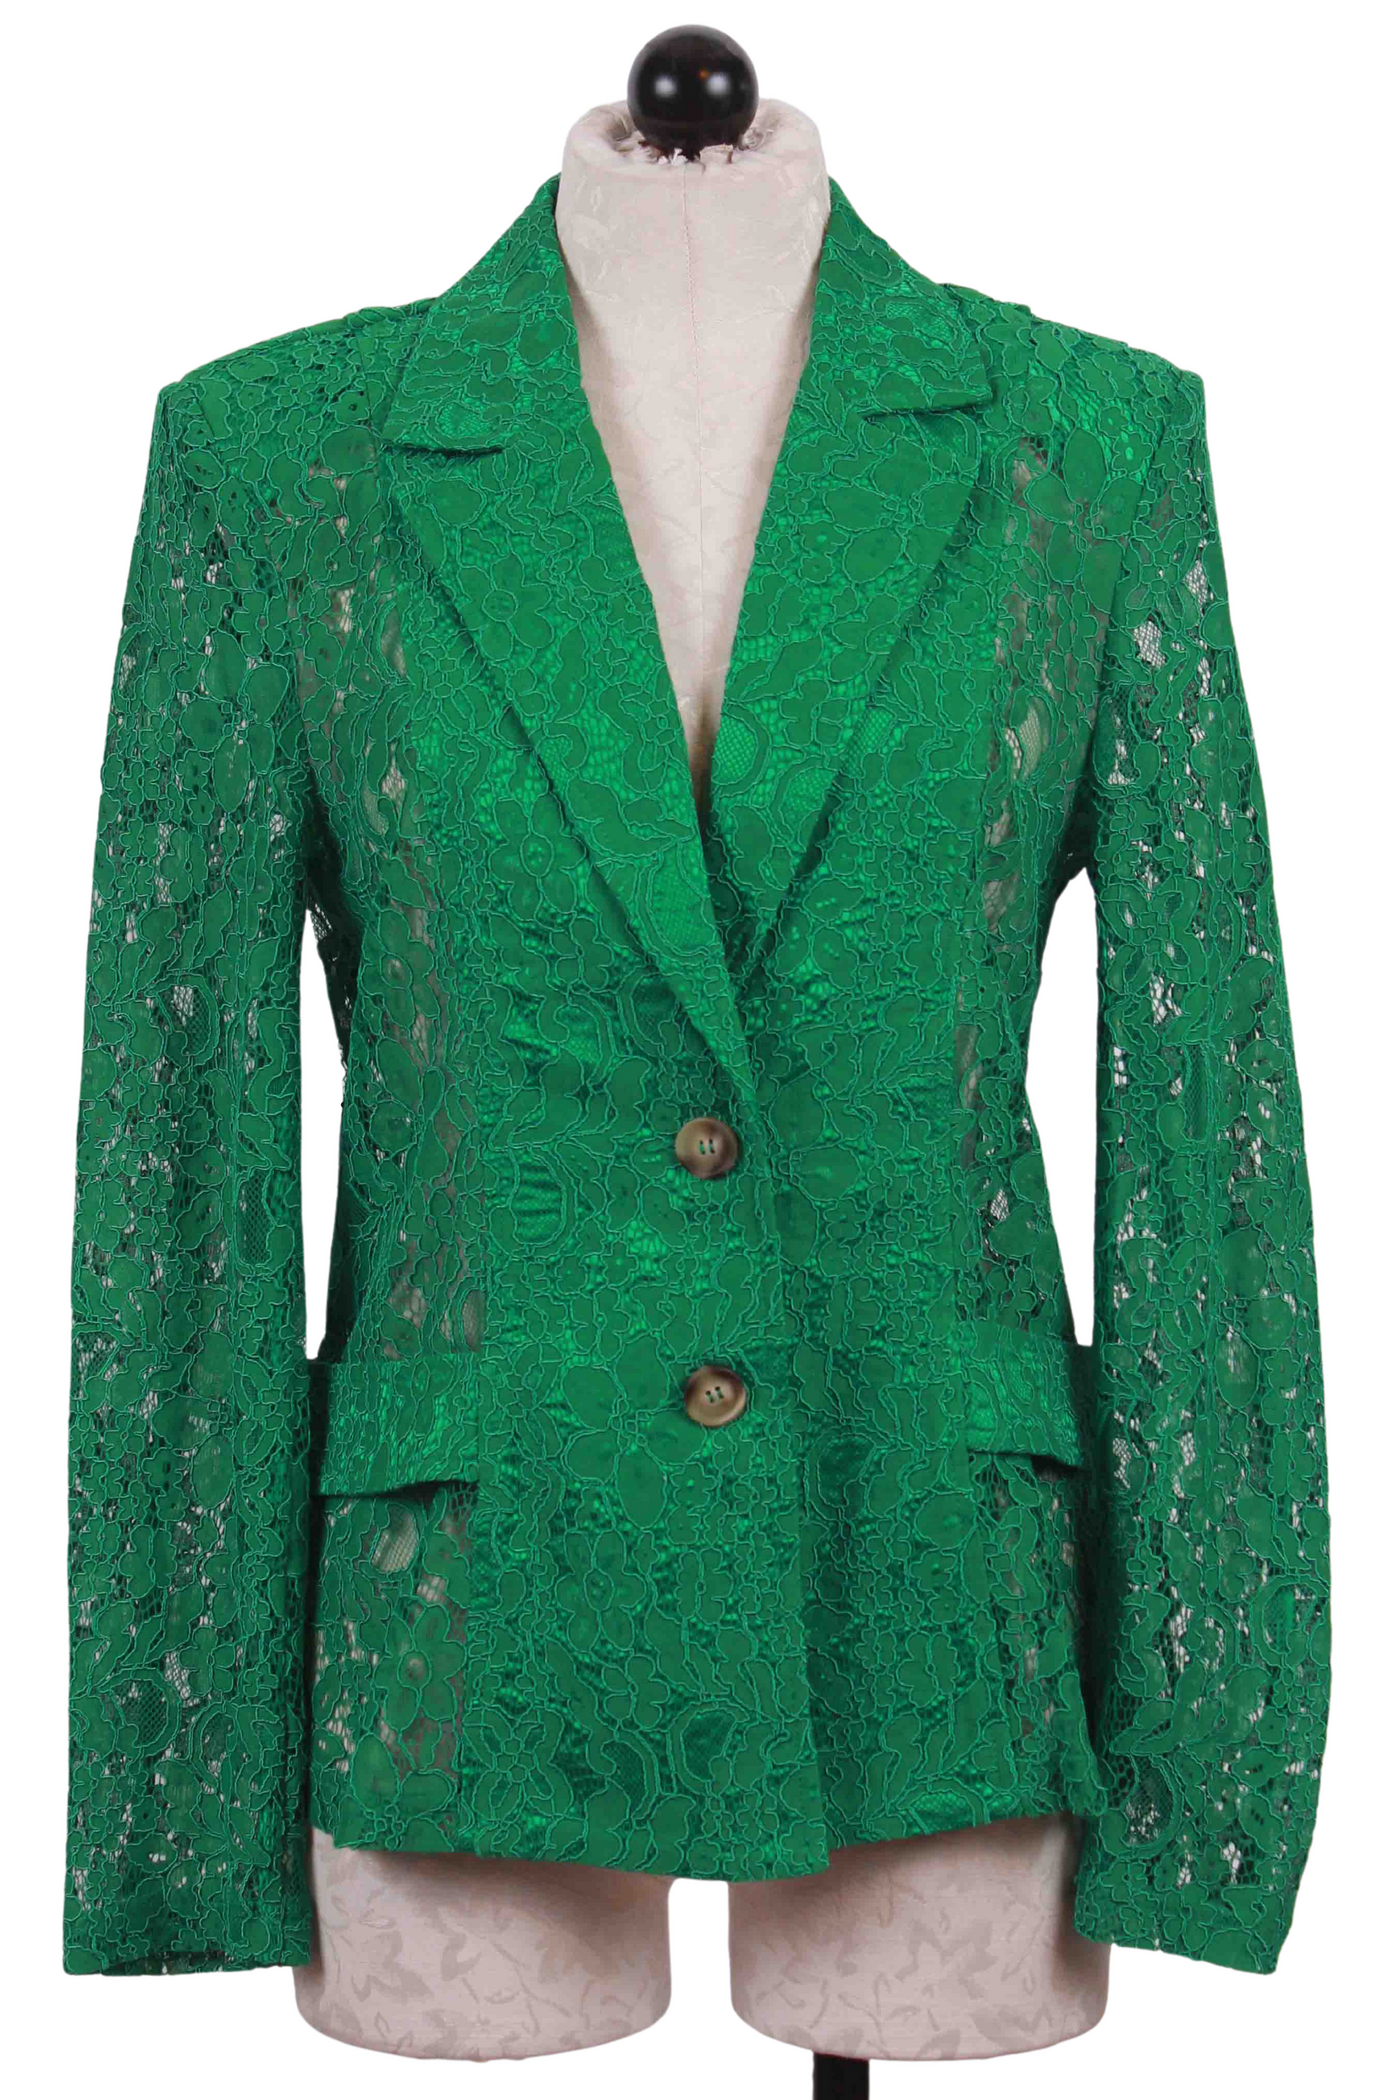 Two Button Green unlined Lace Blazer by Frank Lyman 